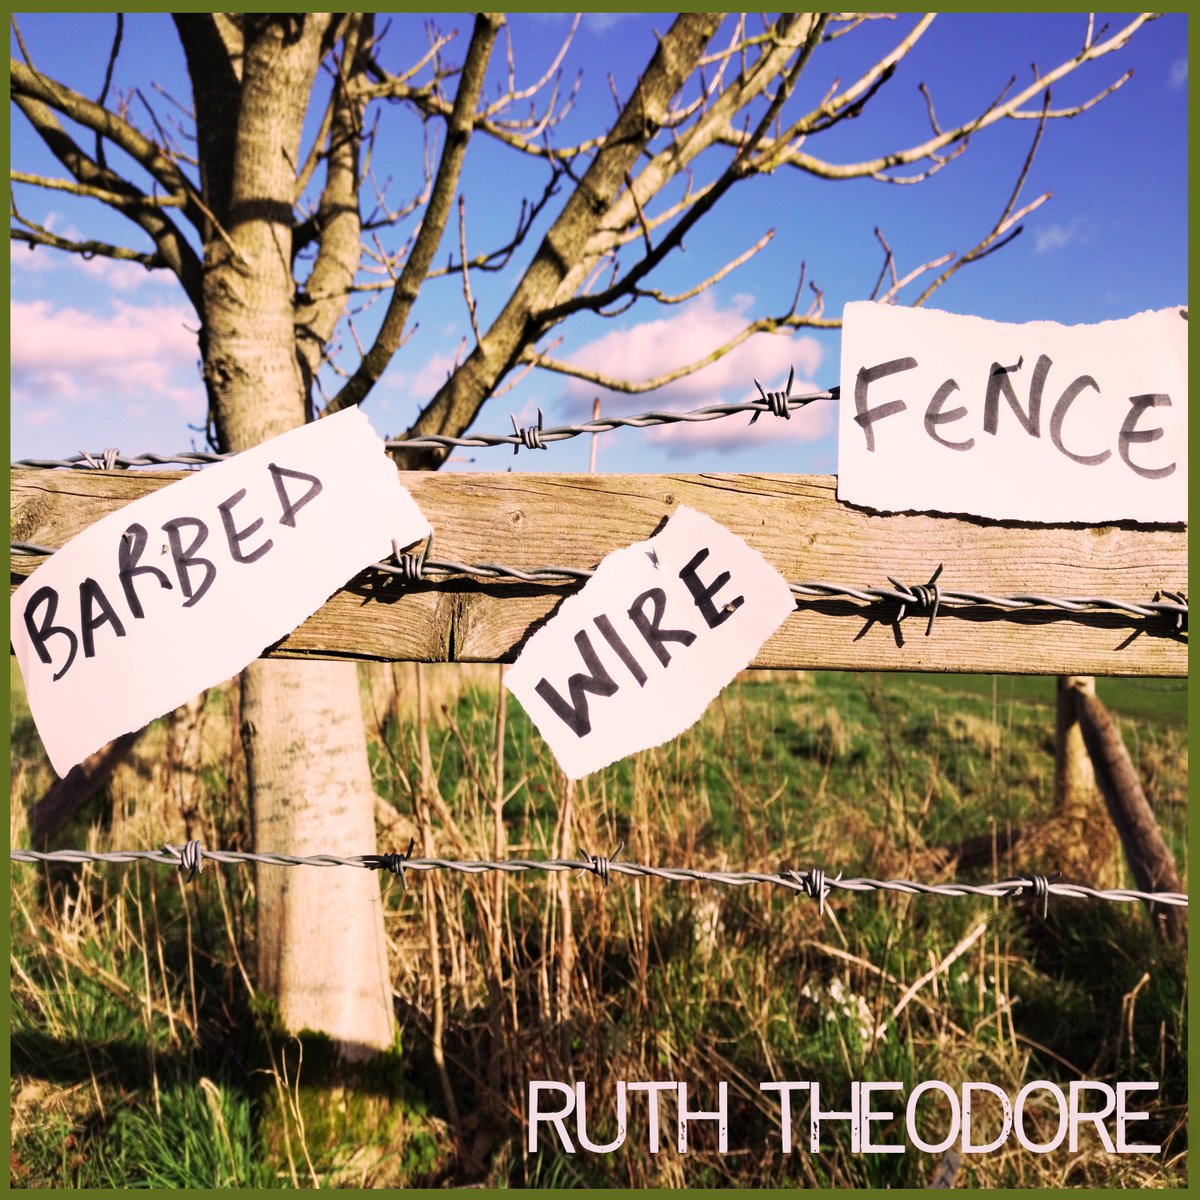 @rutheodoremusic's 'Barbed Wire Fence' single + Official Video out today. Watch: youtube.com/watch?v=vYpgmi… Listen: righteousbabe.ffm.to/ruththeodore-b… This is the final single released in advance of Ruth's 'I Am I Am' album, out May 3rd and available for pre-order now: righteousbabe.ffm.to/ruththeodore-i…